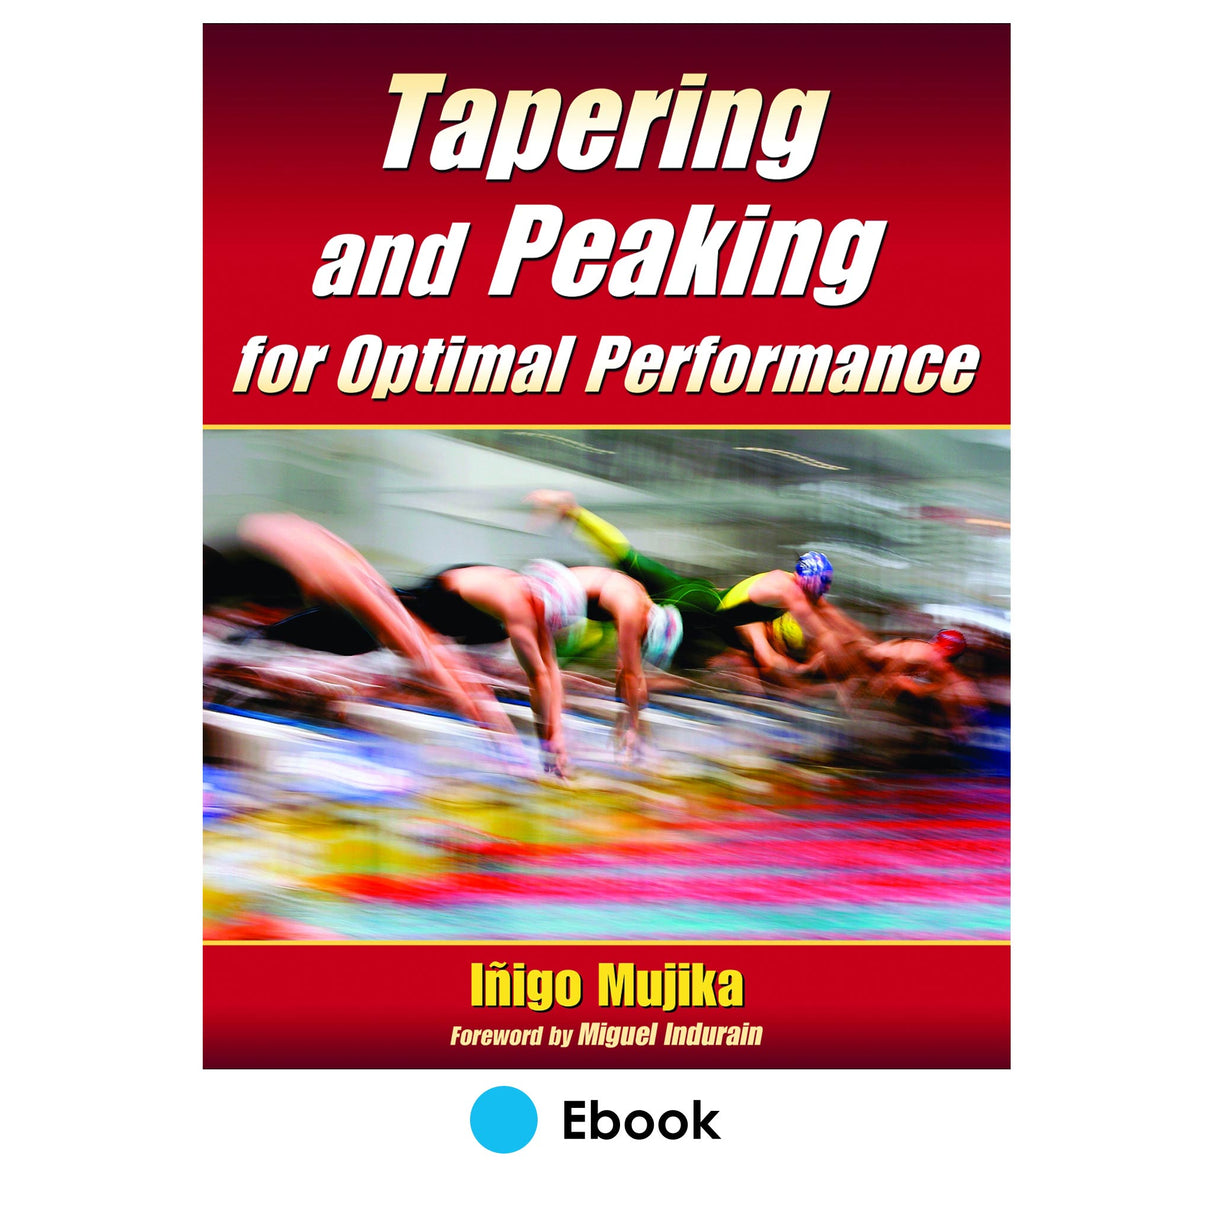 Tapering and Peaking for Optimal Performance PDF